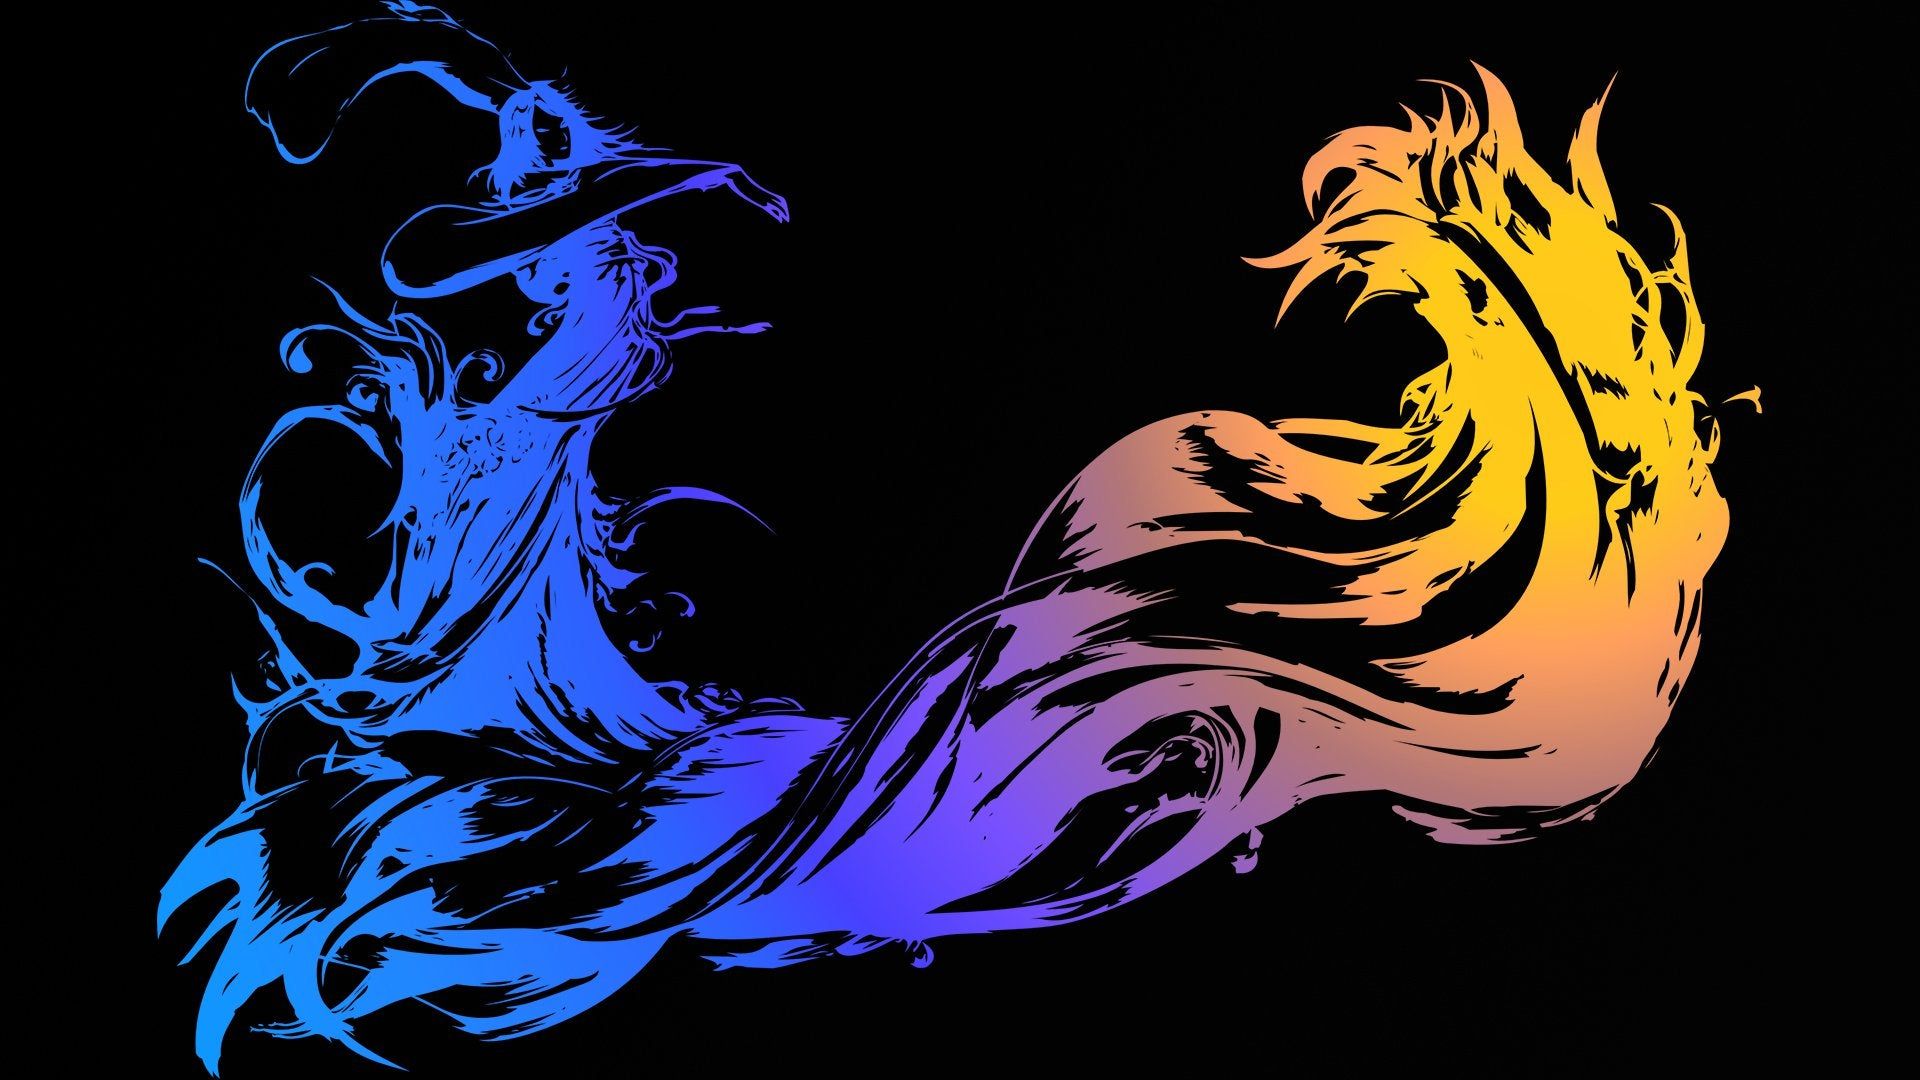 Someone requested it, so I made a Final Fantasy X wallpaper. Here